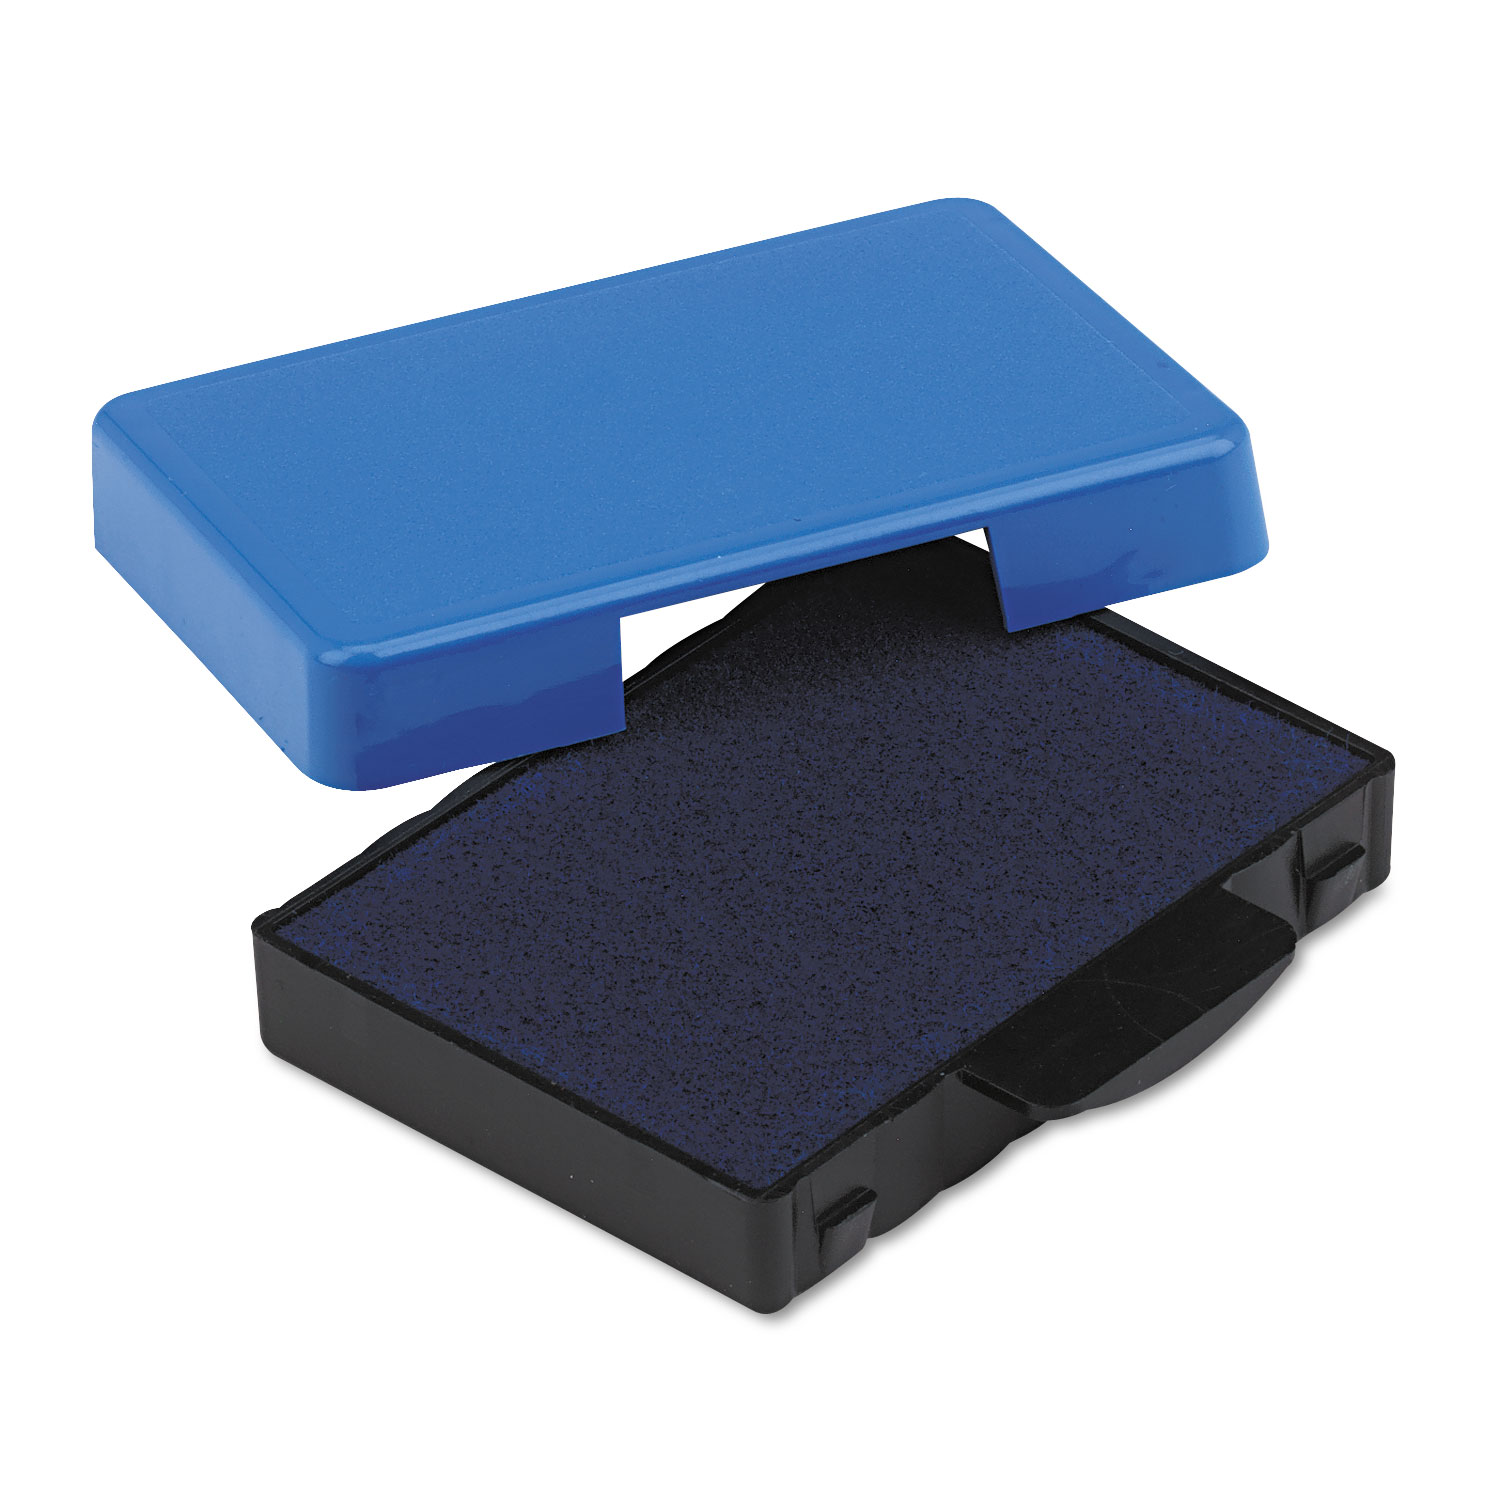  Identity Group P5430BL Trodat T5430 Stamp Replacement Ink Pad, 1 x 1 5/8, Blue (USSP5430BL) 